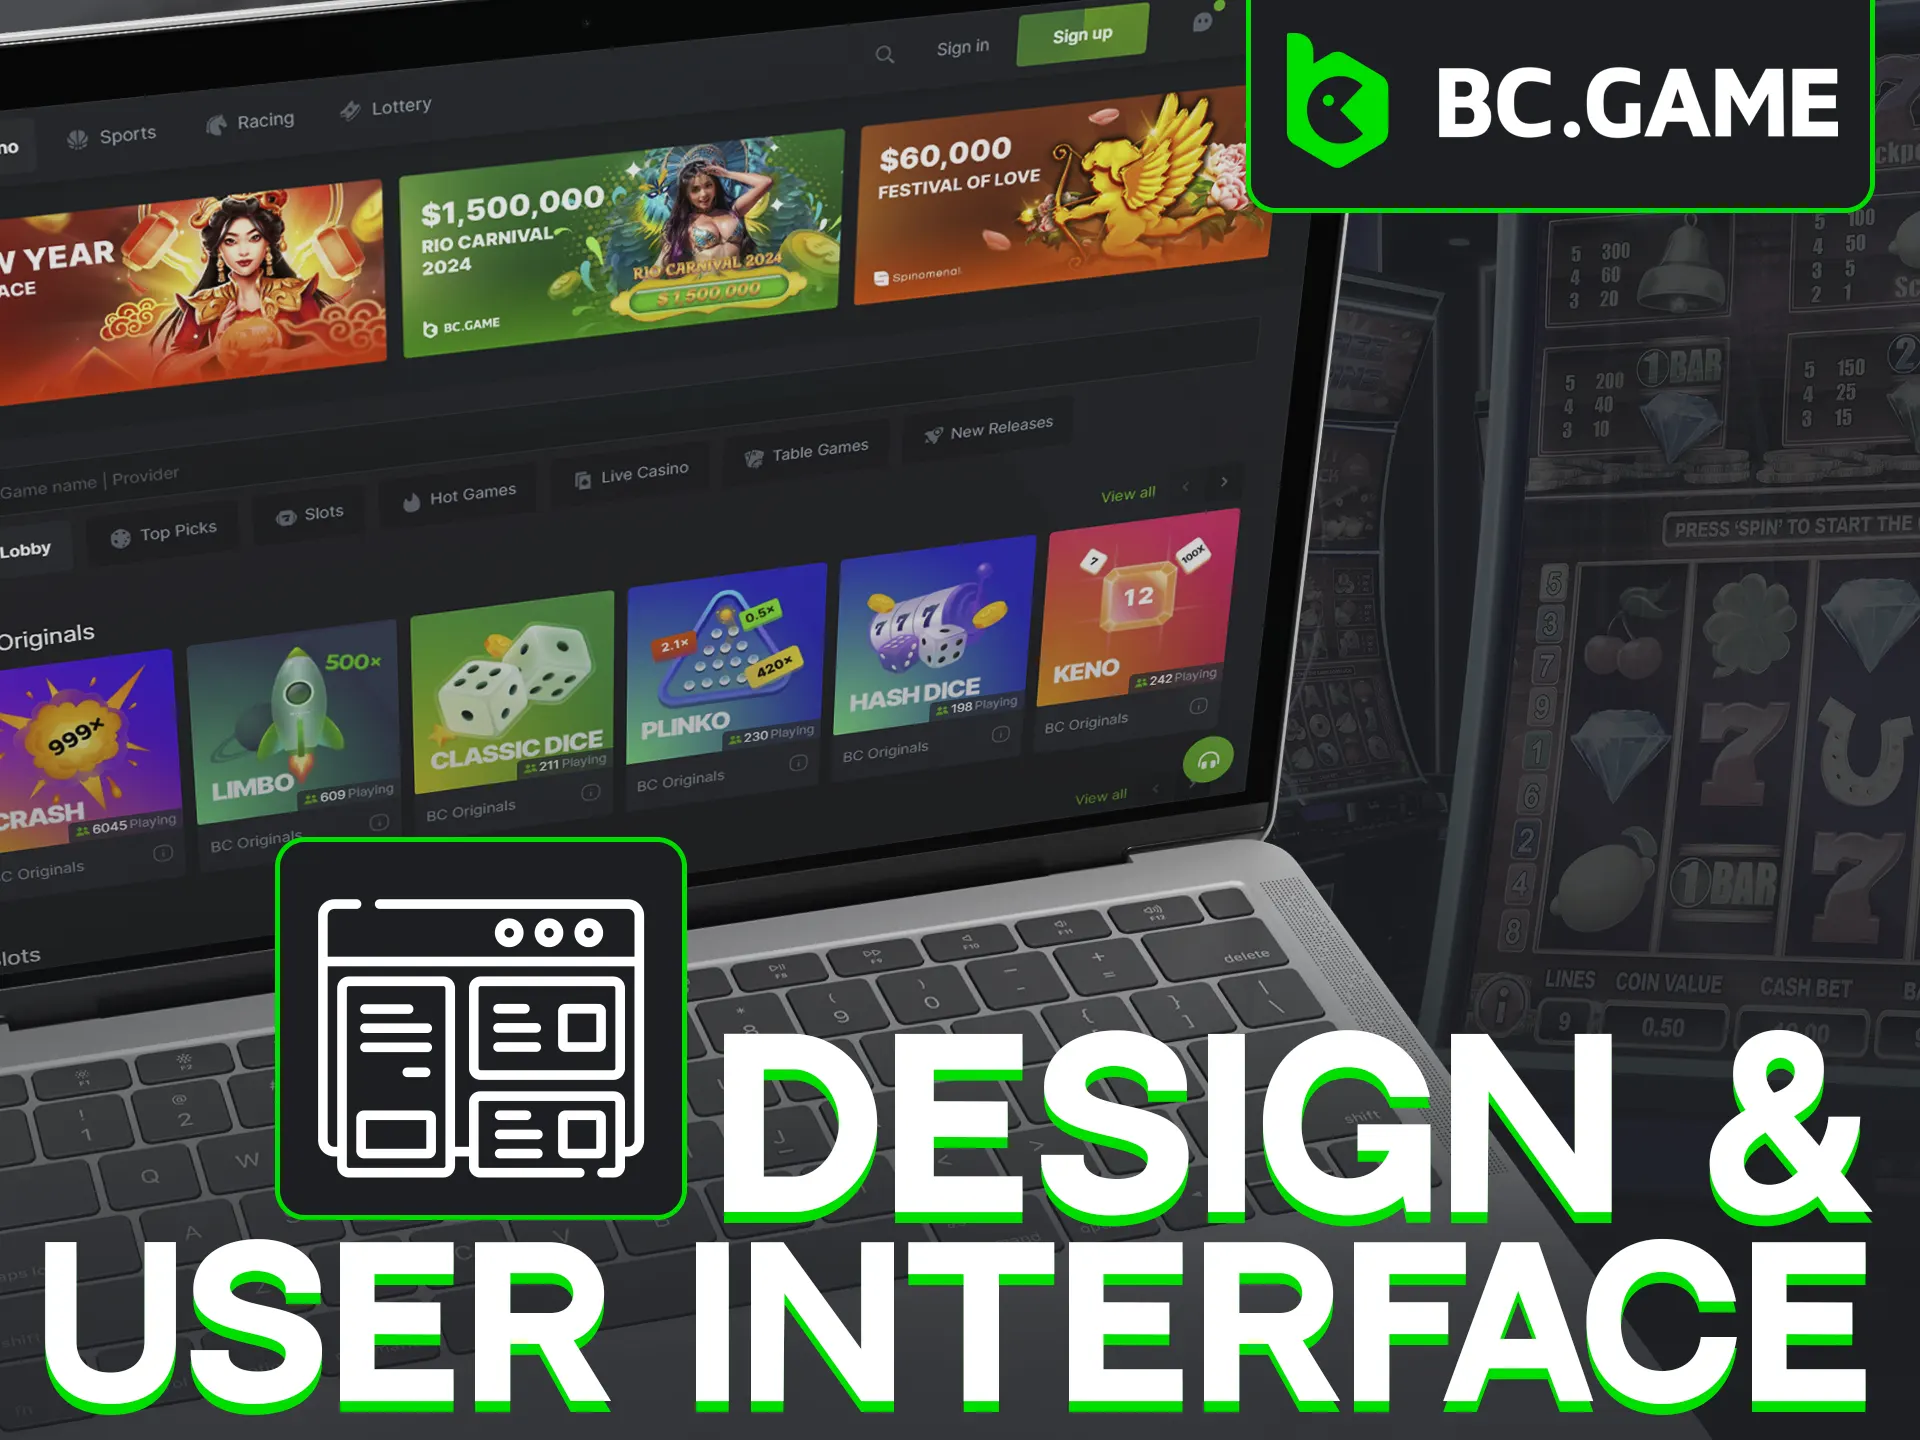 BC Game Casino offers an attractive design and user-friendly interface.